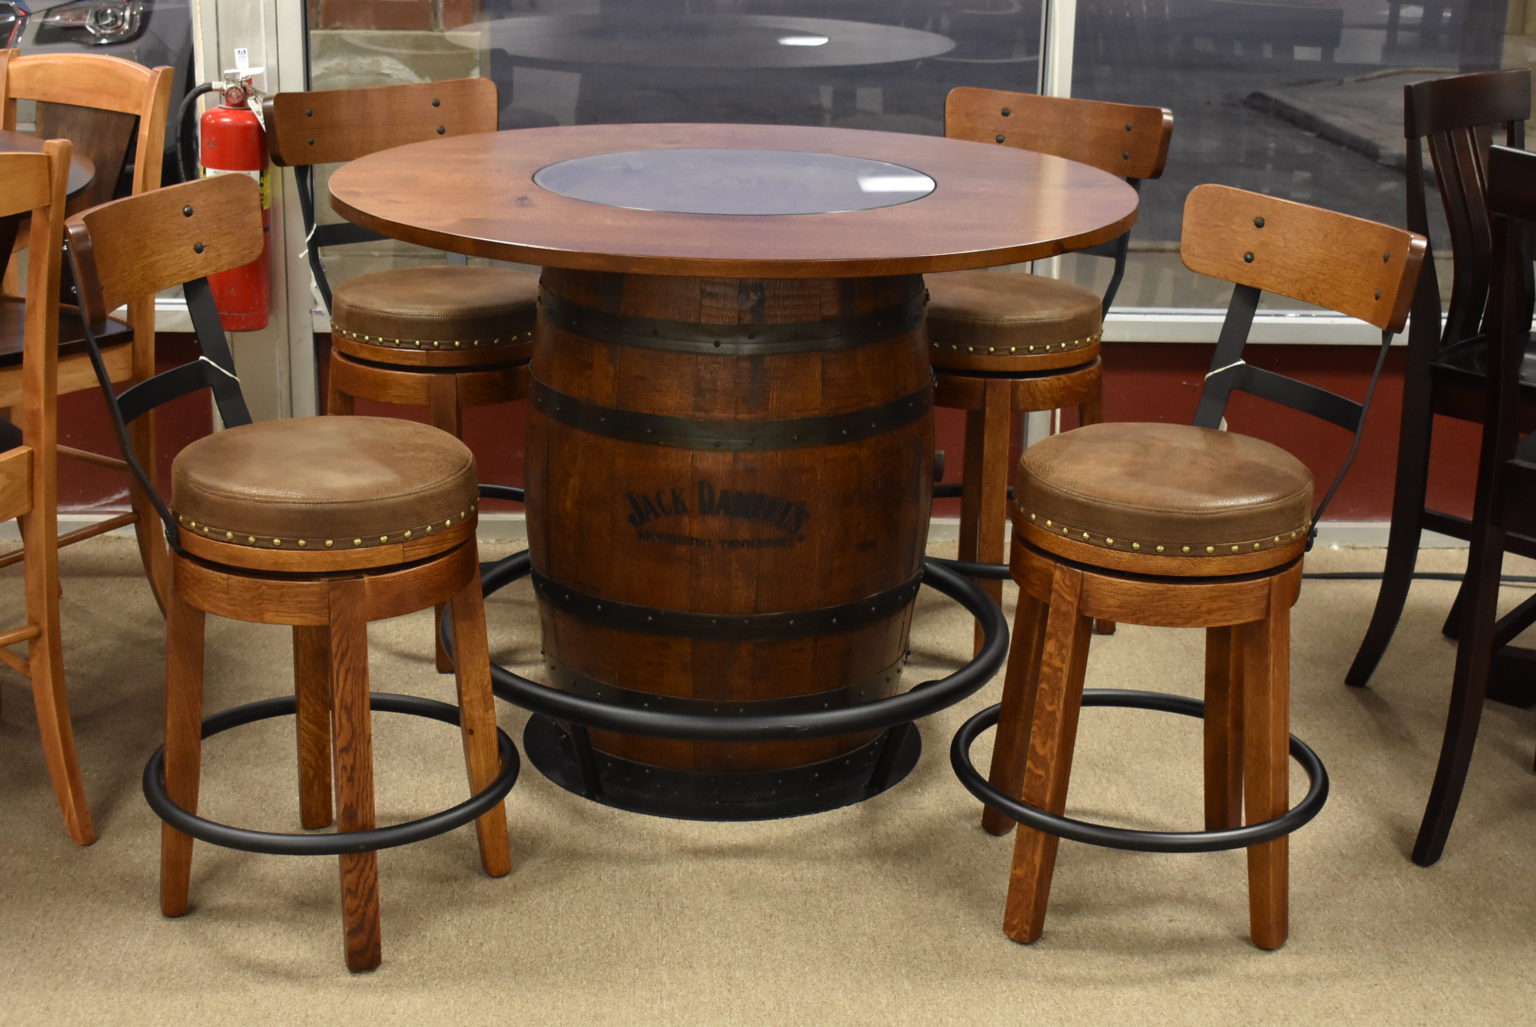 Top 89+ Breathtaking Jack Daniels Barrel Dining Room Table Not To Be Missed